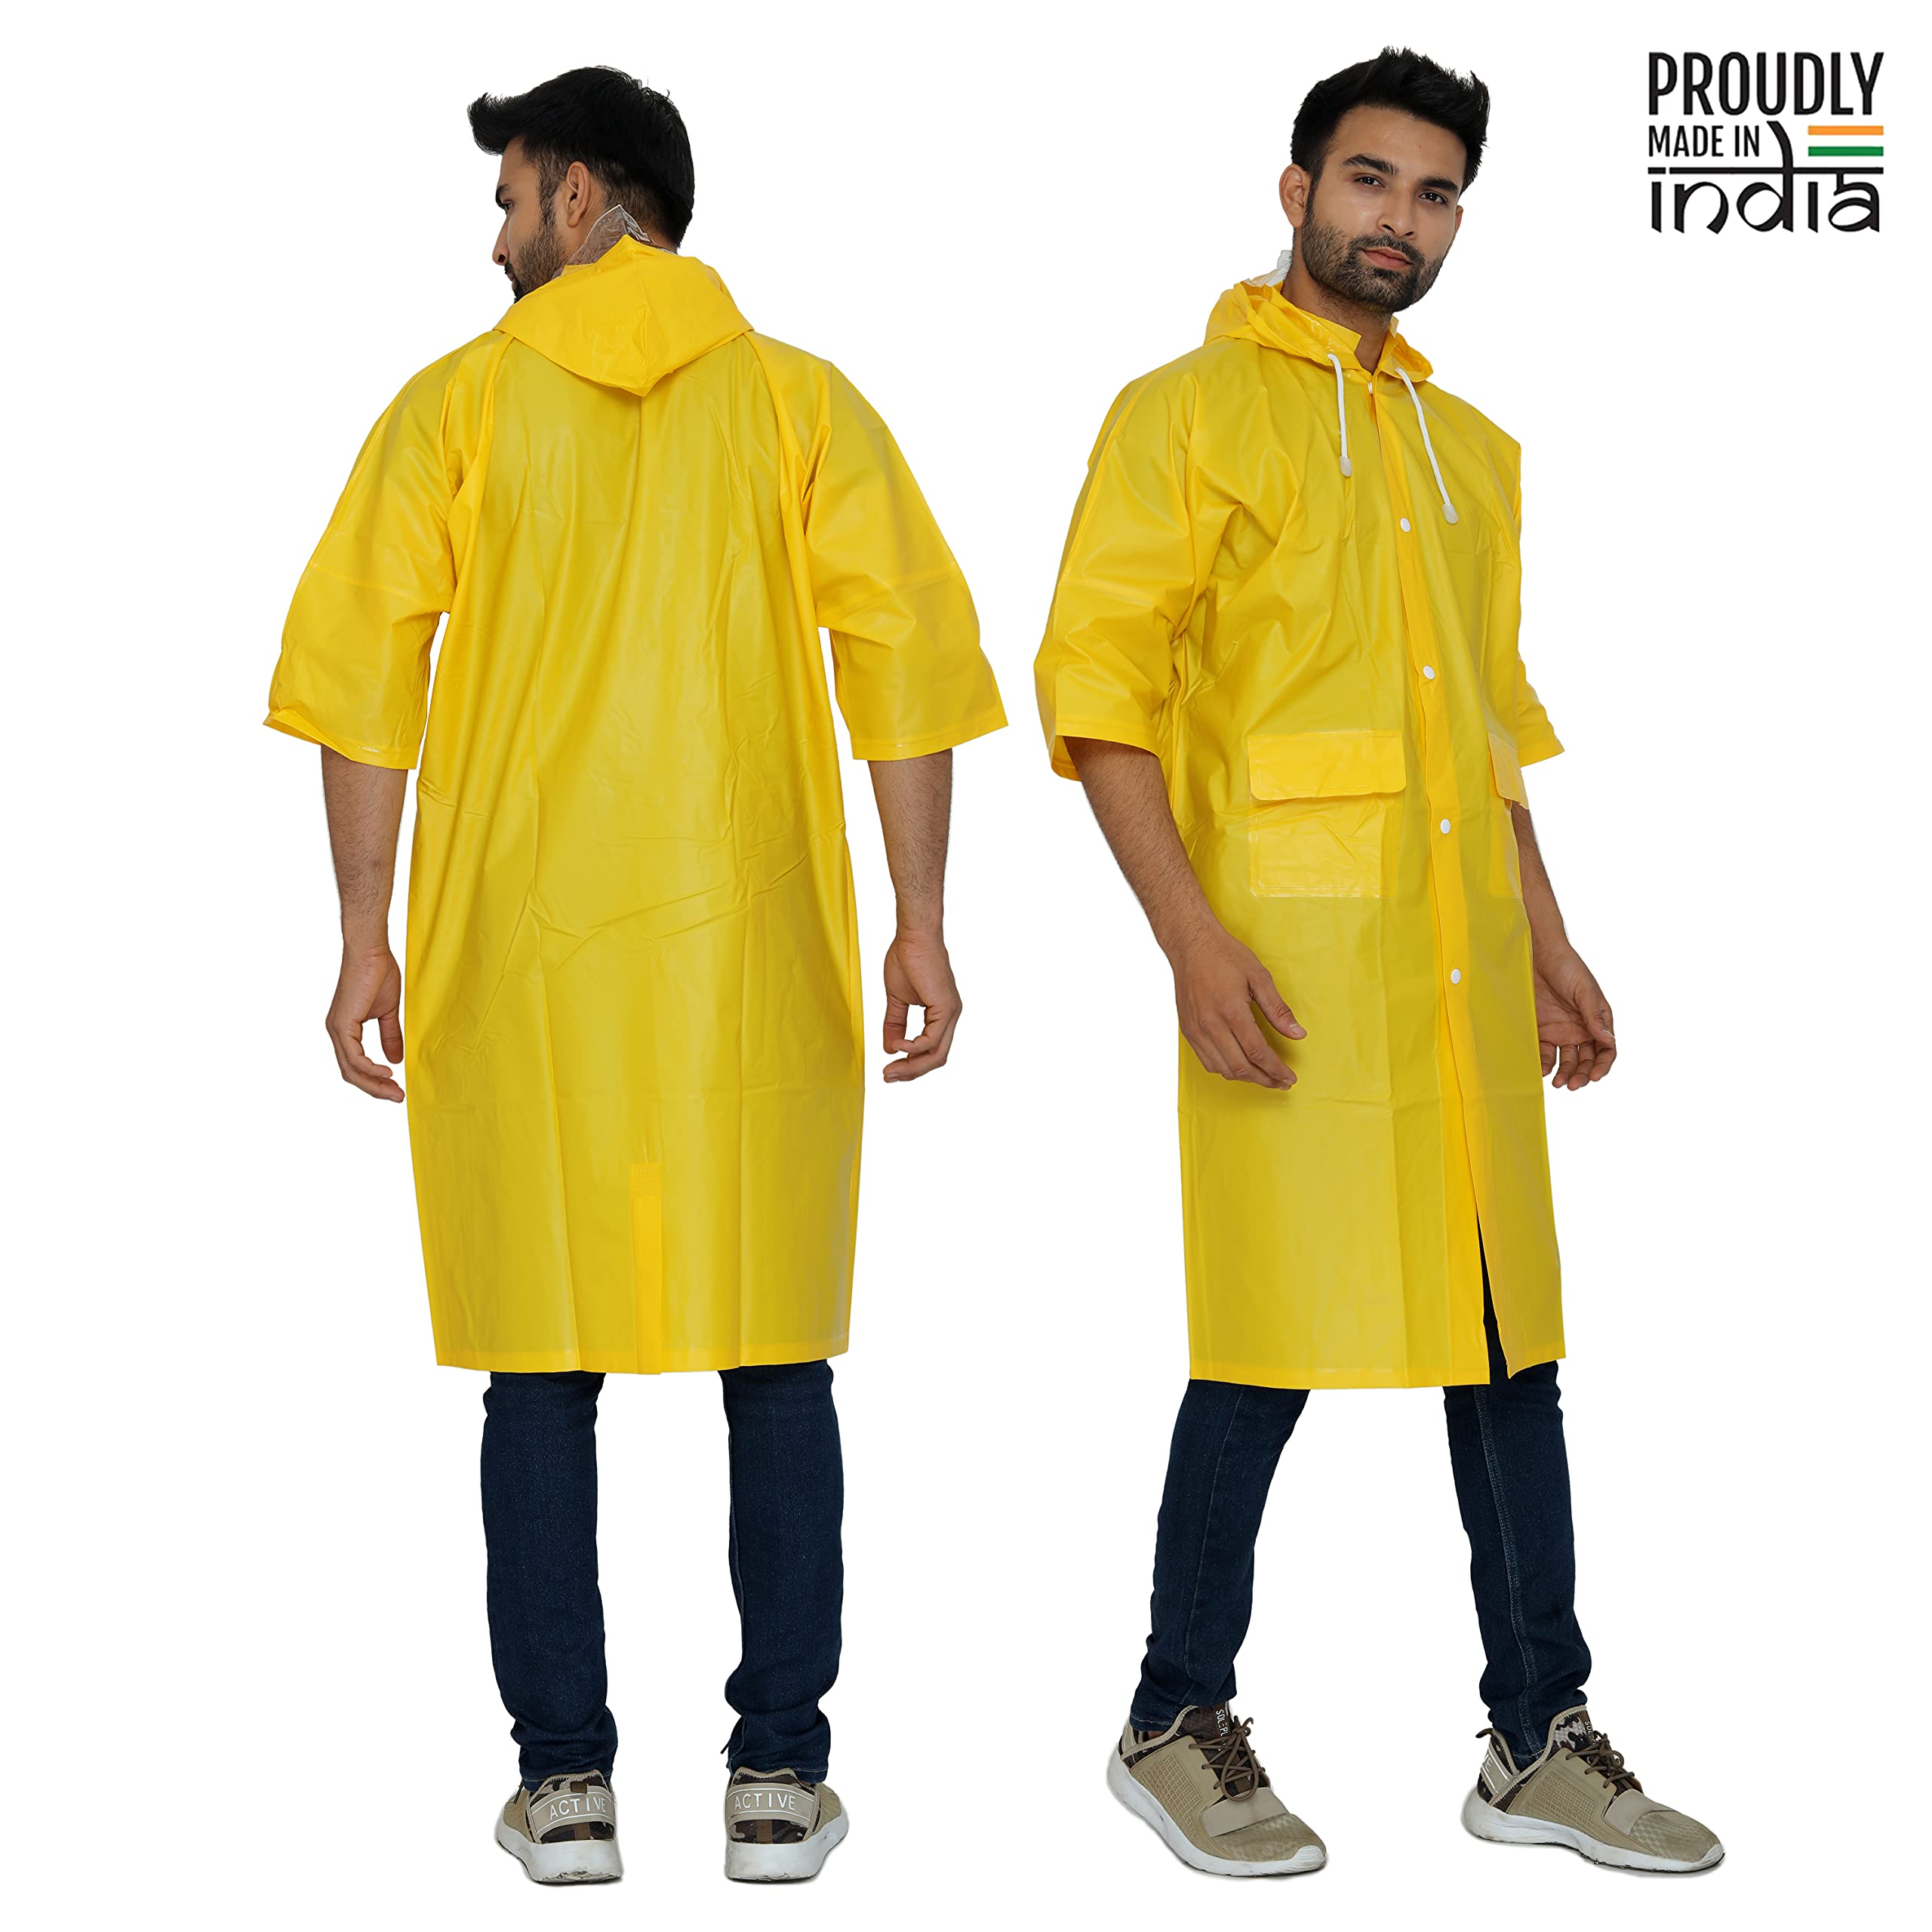 THE CLOWNFISH Raincoat for Men and Women Waterproof PVC Material Longcoat with Adjustable Hood (Yellow, Free Size)